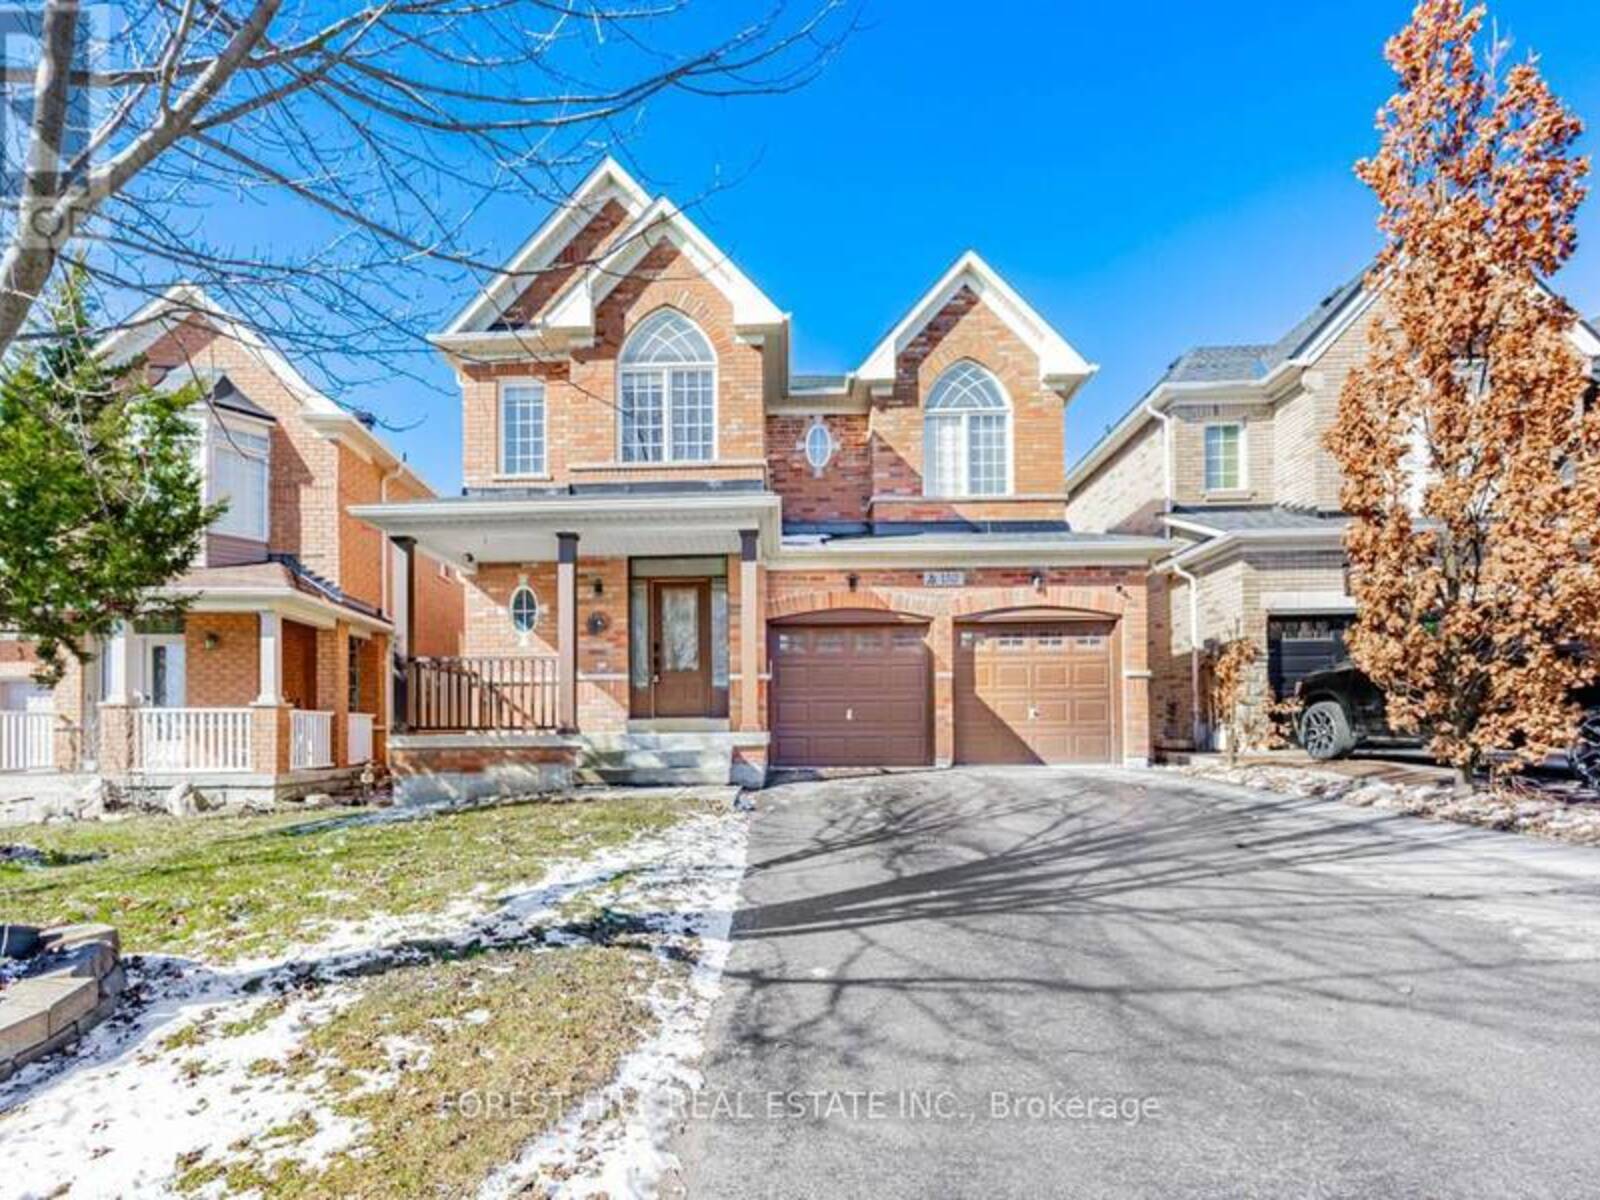 152 MANLEY AVE, Whitchurch-Stouffville, Ontario L4A 0C5